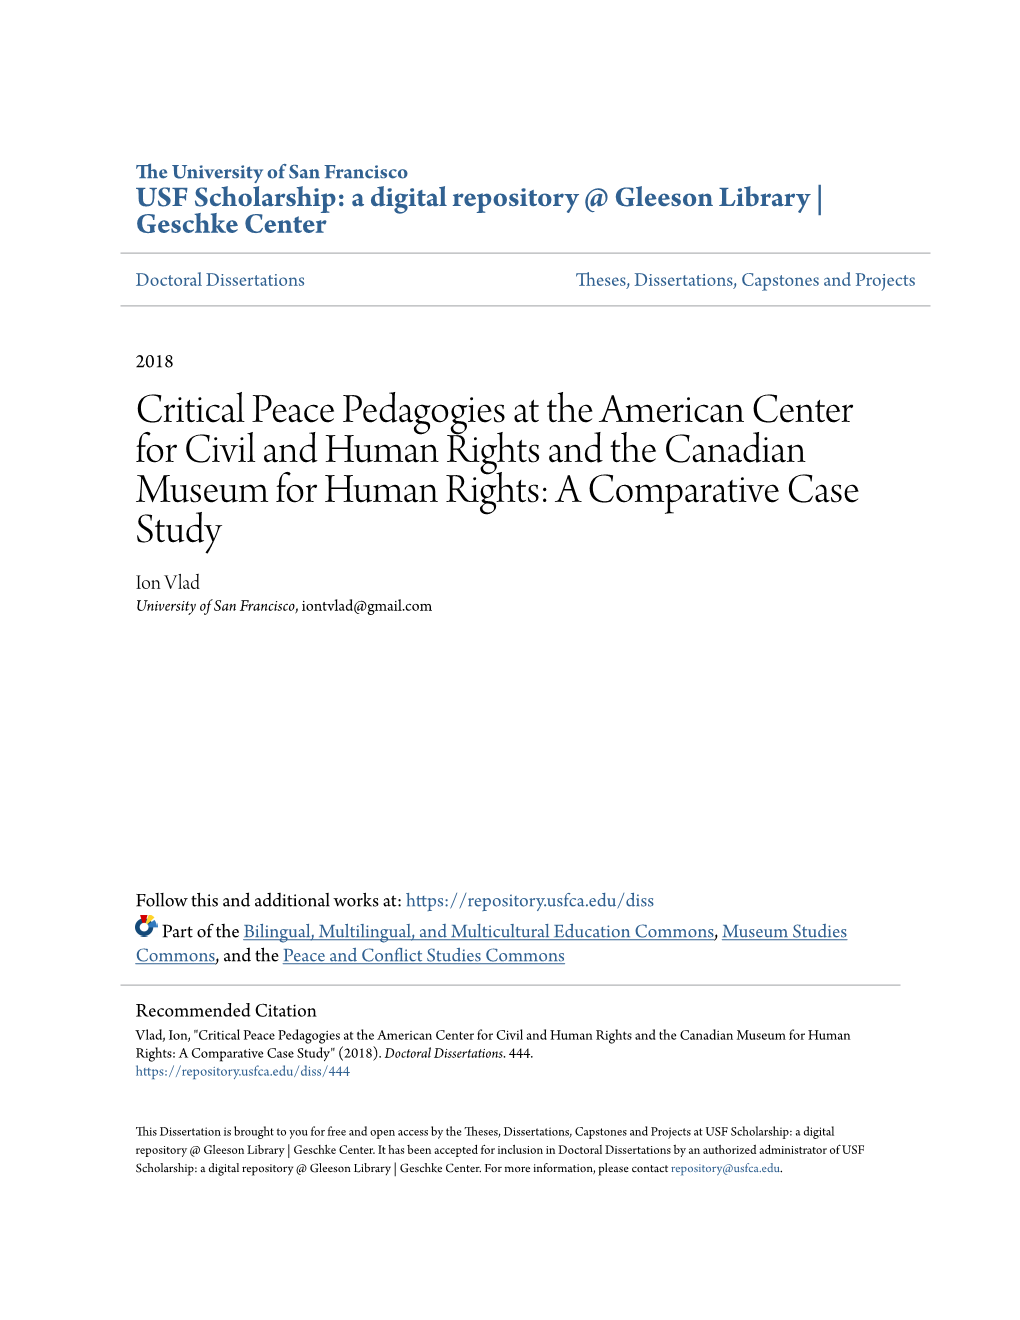 Critical Peace Pedagogies at the American Center for Civil and Human Rights and the Canadian Museum for Human Rights